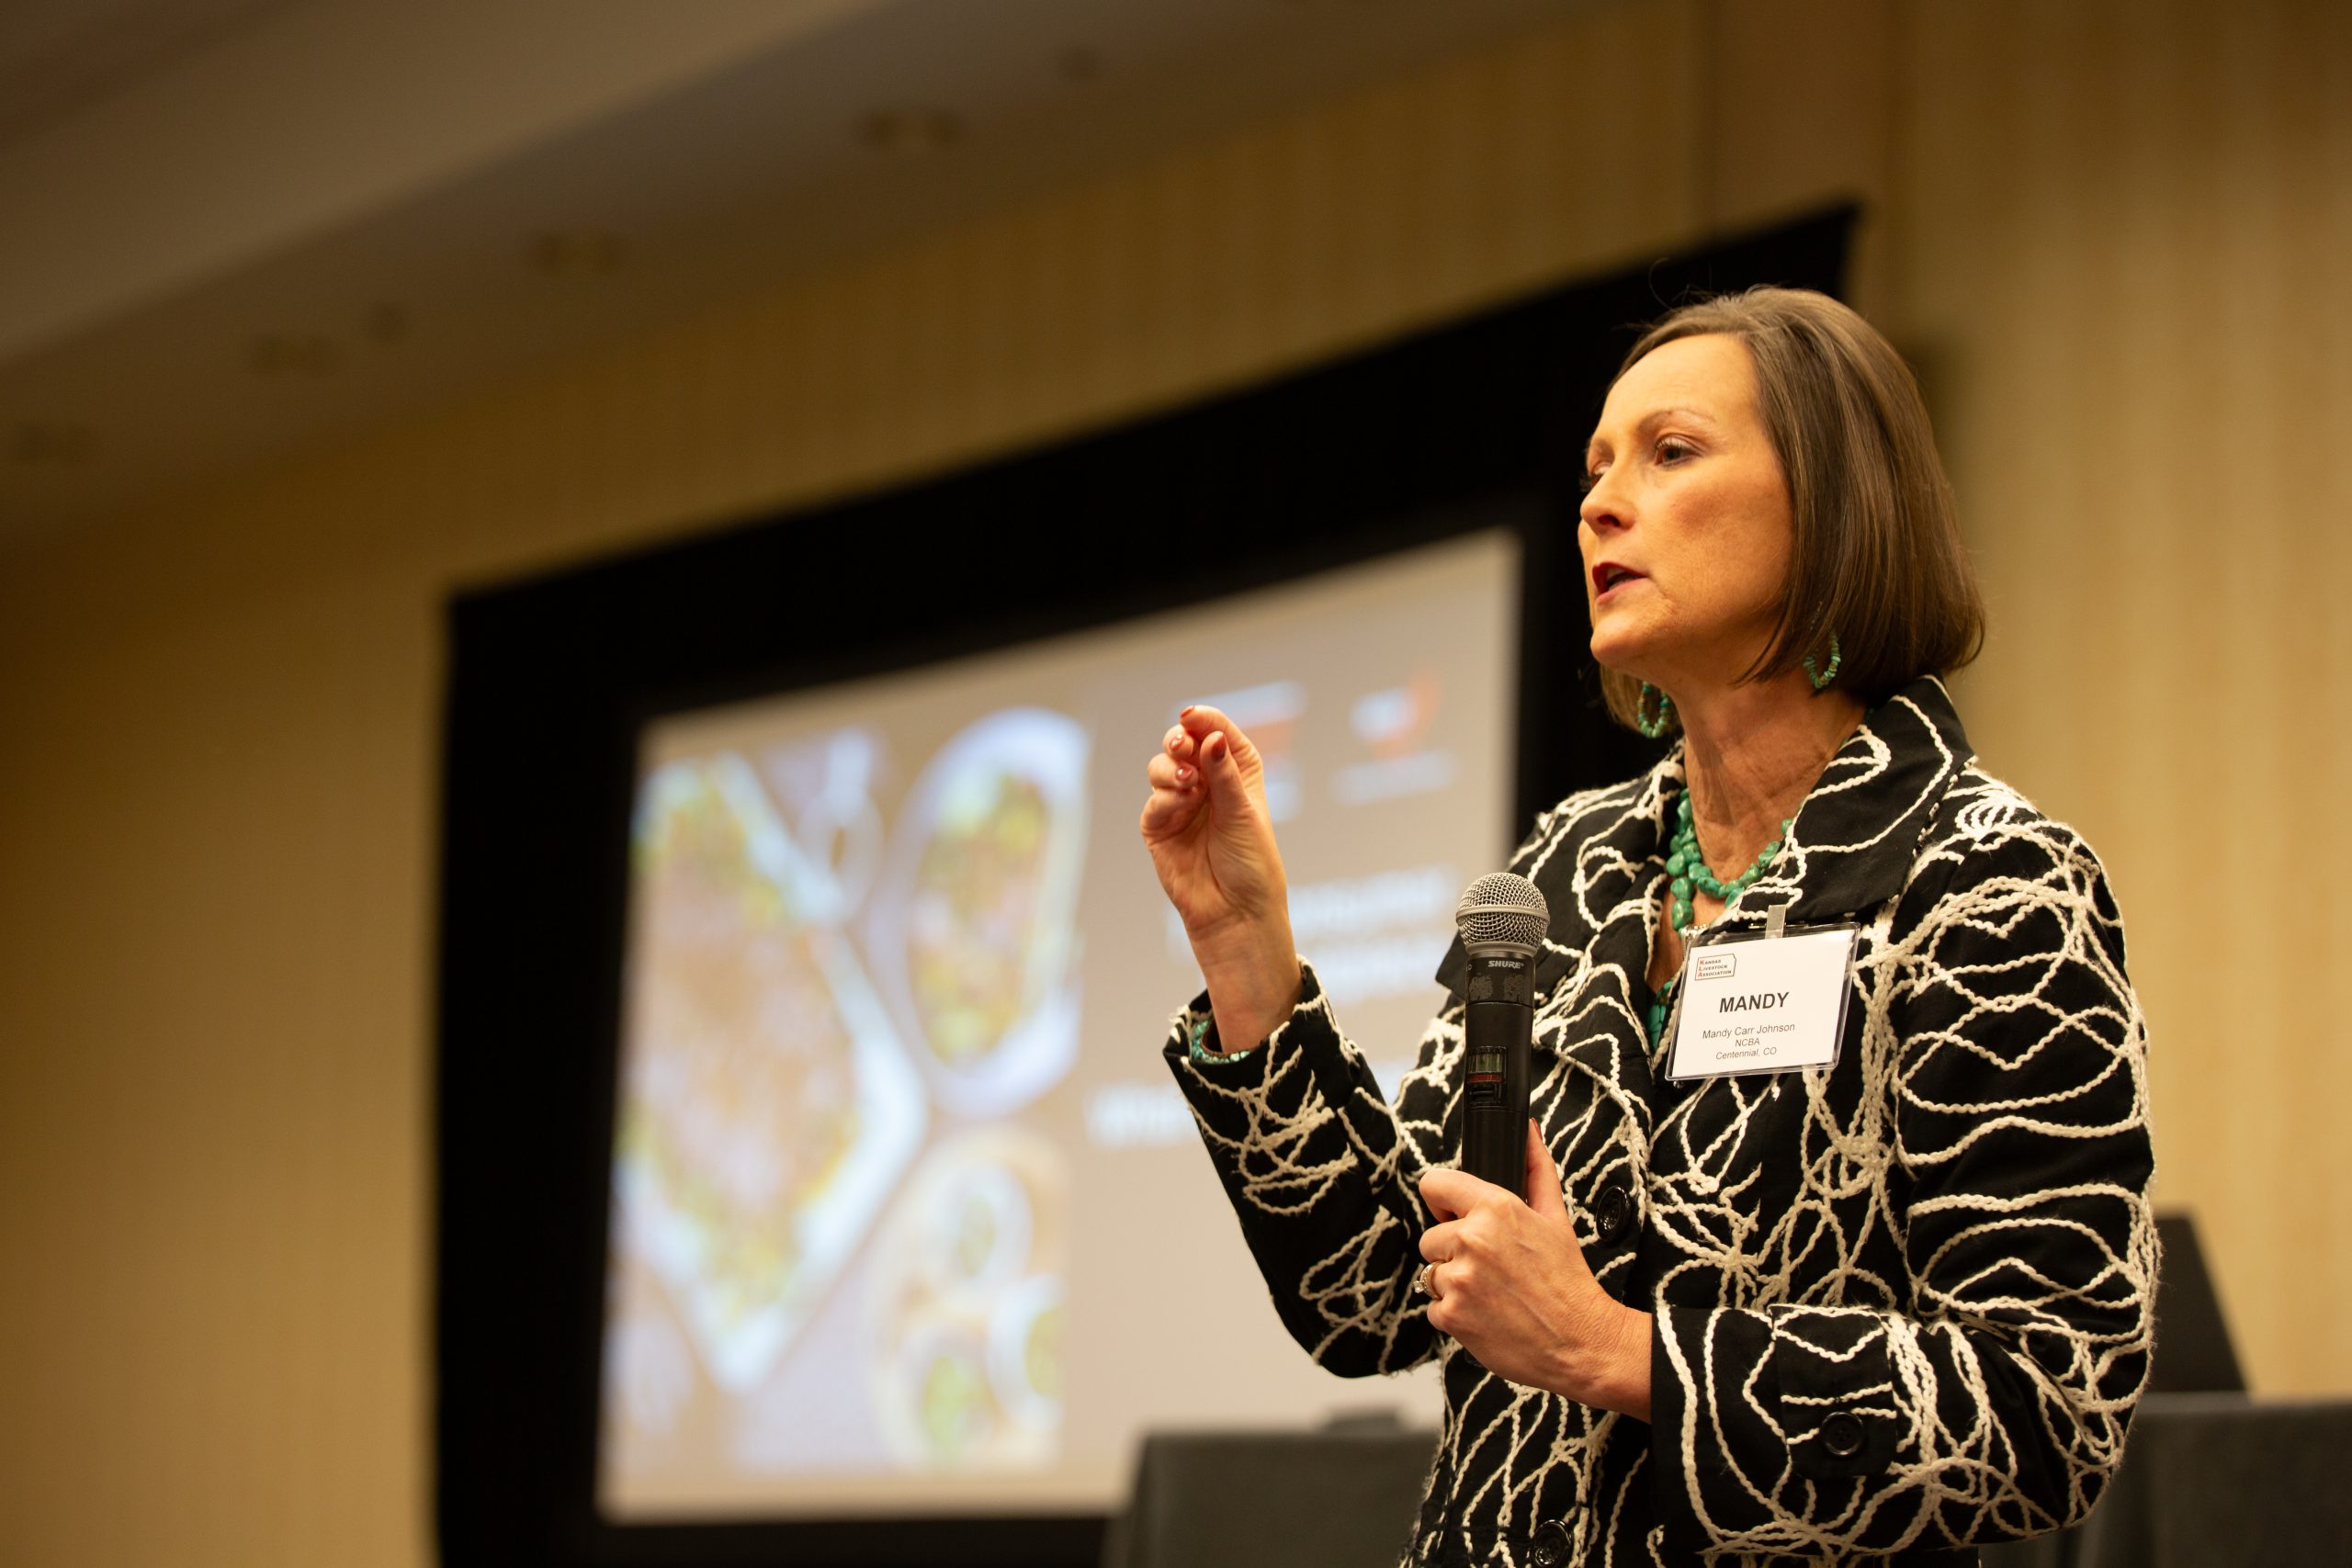 Mandy Carr Johnson detailed what is happening with consumer eating, buying and consuming trends during the Kansas Livestock Association Convention Nov. 30 in Wichita, Kansas. Johnson is the senior executive director of scientific affairs department at the National Cattlemen’s Beef Association where she’s leads a team which looks after technical research in beef safety, product quality, human nutrition and sustainability, as well as the market research and nutrition and health influencer programs. (Journal photo by Kylene Scott.)